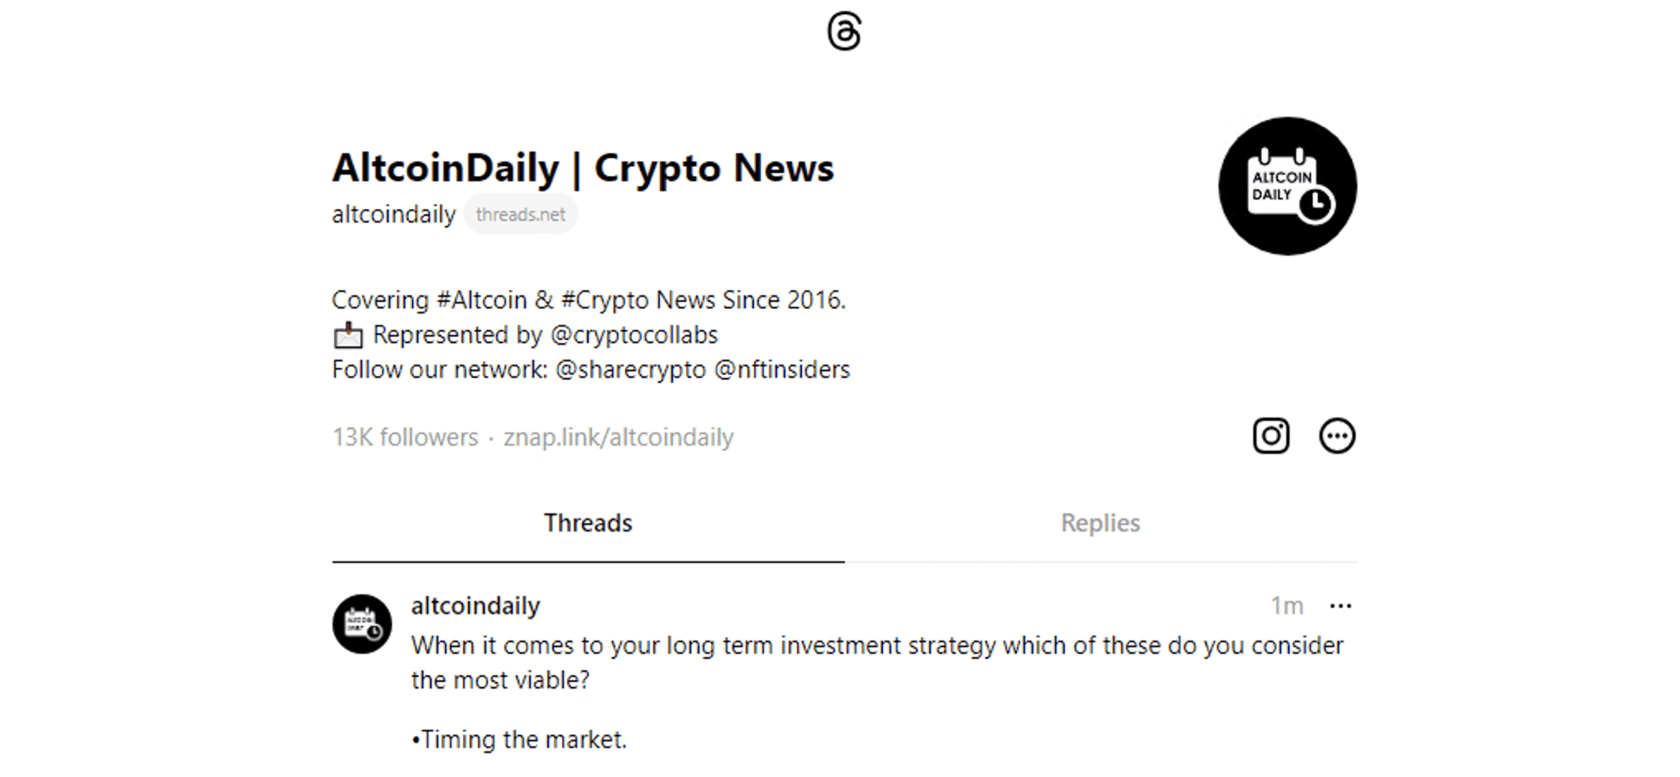 AltcoinDaily